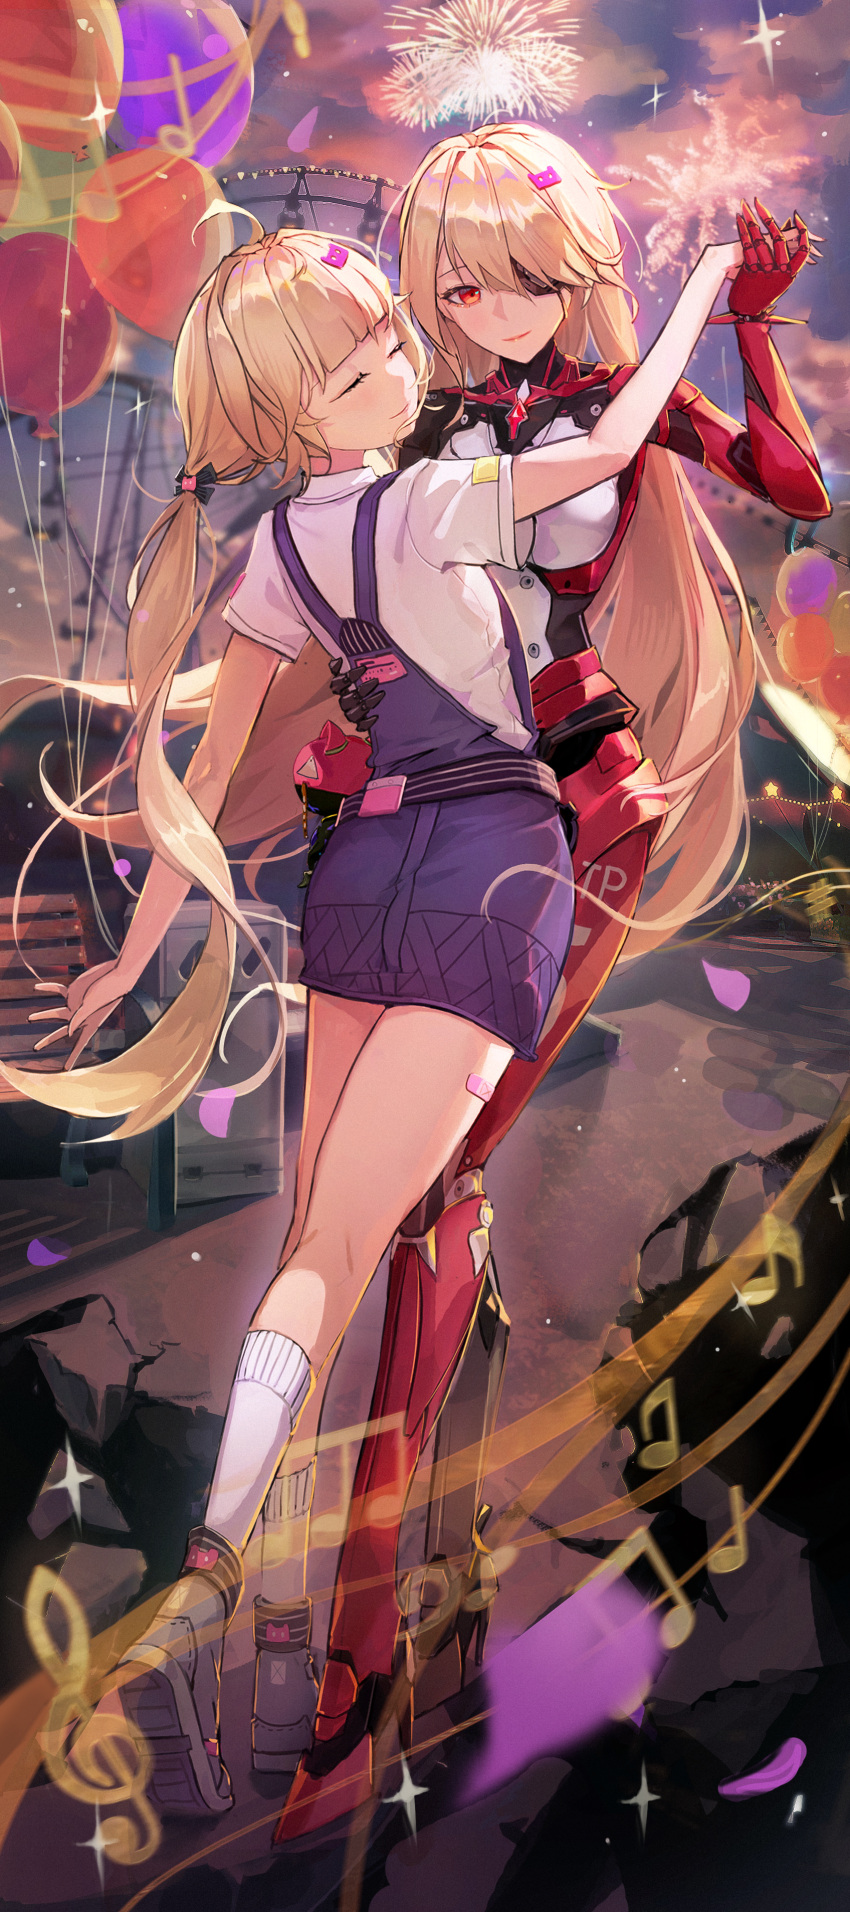 2girls absurdres blonde_hair blue_sky closed_eyes closed_mouth cloud cloudy_sky dancing eyepatch facing_to_the_side fireworks full_body highres holding_hands looking_at_viewer multiple_girls nemesis_(tower_of_fantasy) overalls red_eyes shirli_(tower_of_fantasy) sky smile socks tower_of_fantasy twintails xude yuri